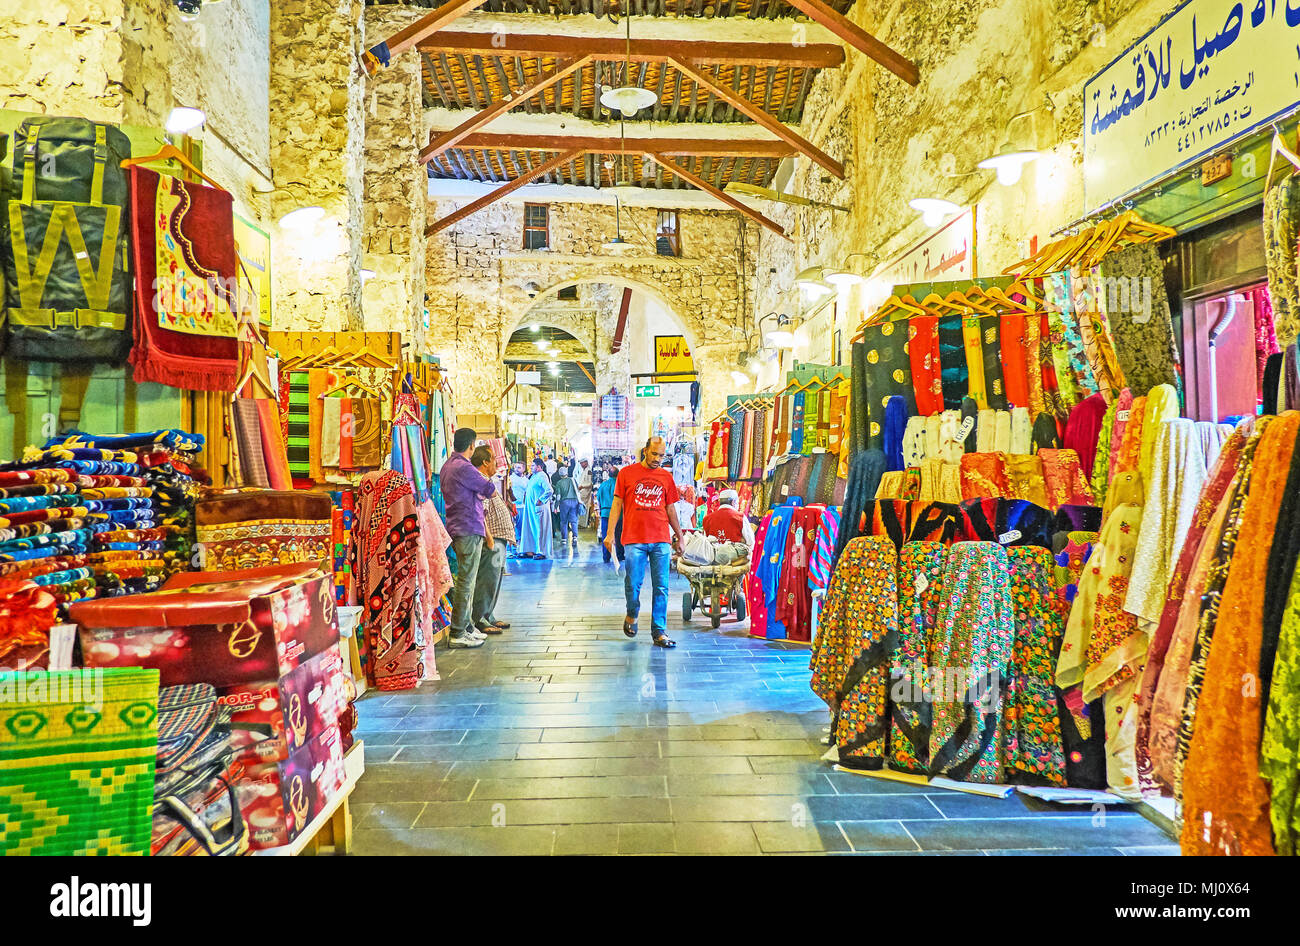 DOHA, QATAR - FEBRUARY 13, 2018: Textile department of  Souq Waqif, the stores in narrow medieval alleyway offer different fabrics, decorated with col Stock Photo